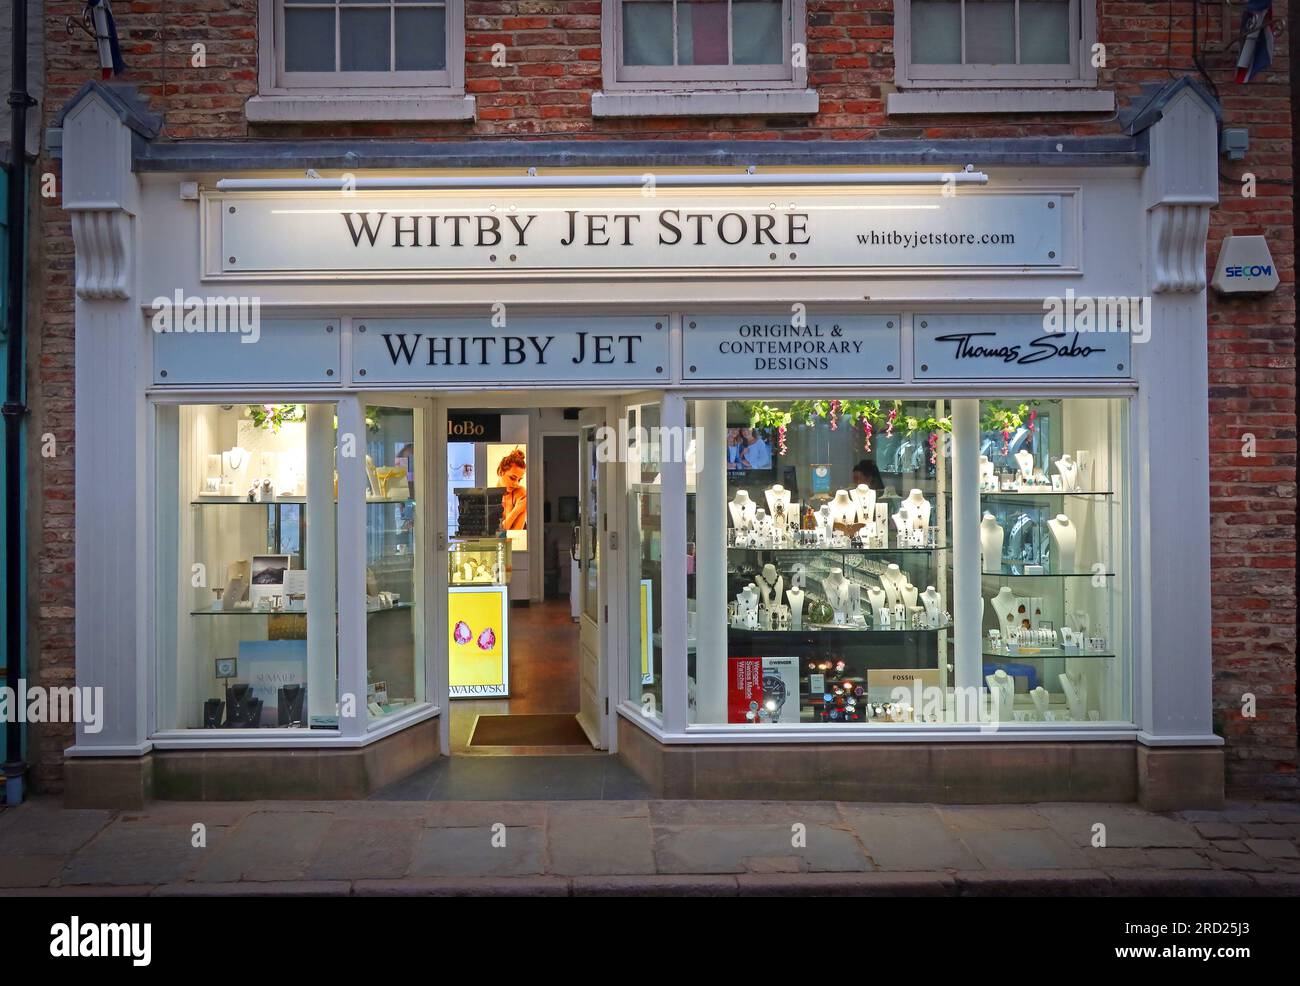 Whitby tourist shops, The Whitby Jet Store,145 Church St, Whitby, North Yorkshire, Yorkshire, England, UK,  YO22 4DE Stock Photo